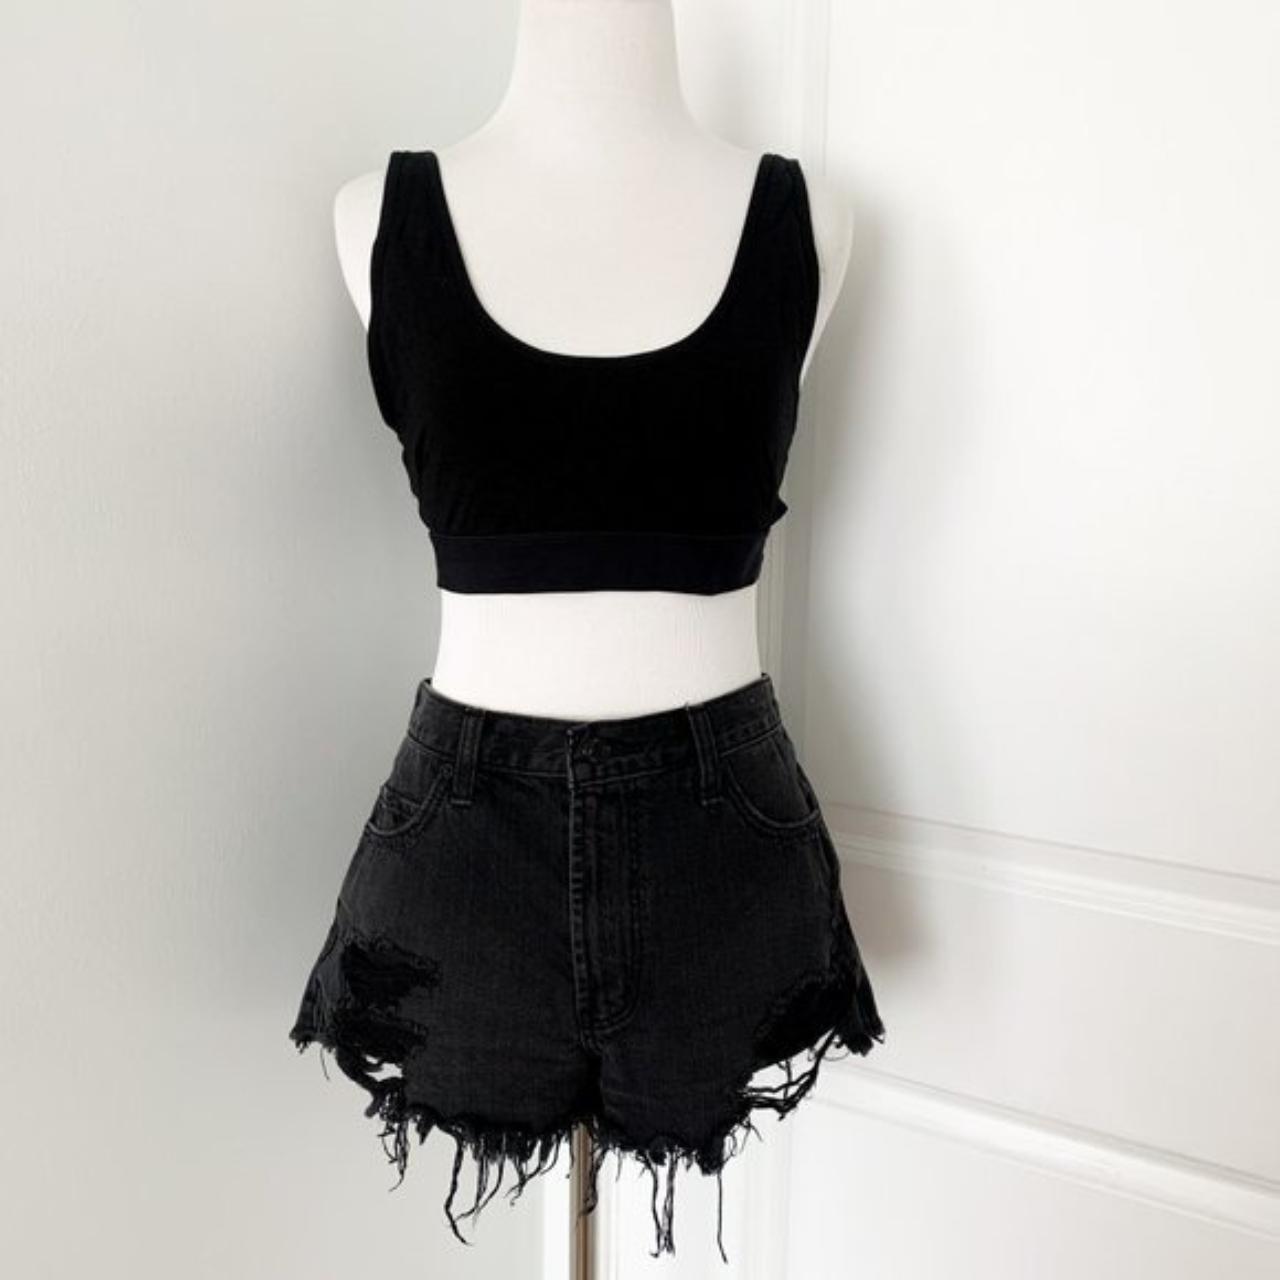 Abercrombie & Fitch Black Demin High Waisted Shorts... - Depop